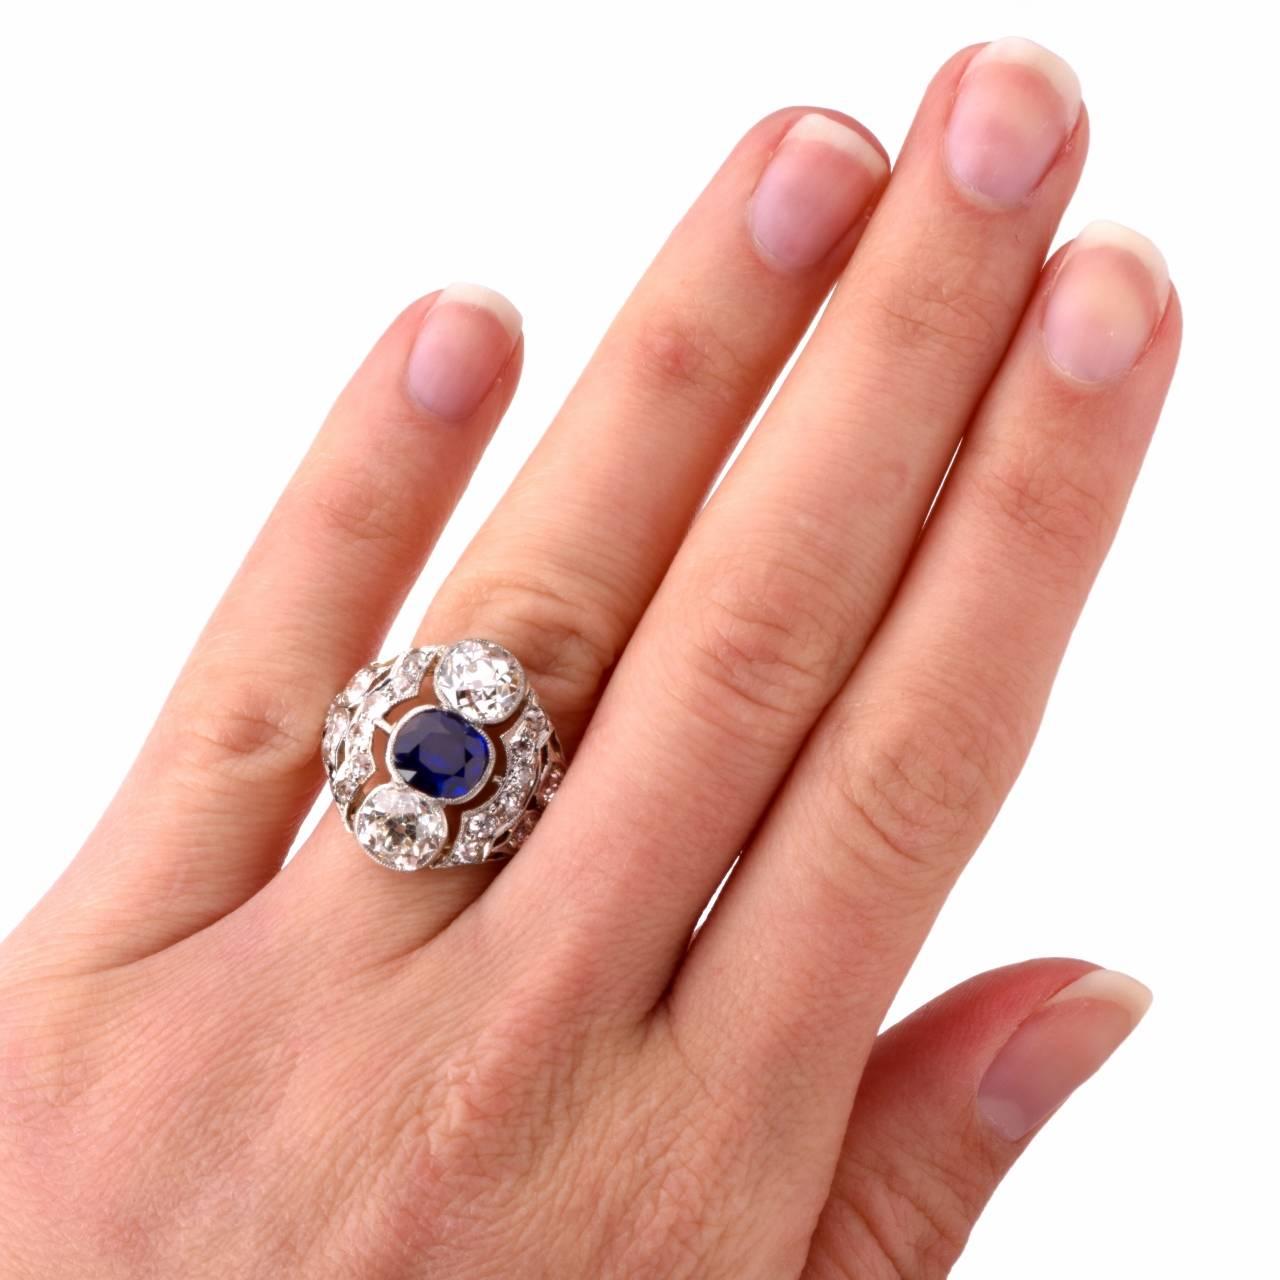 This antique Art Deco ring of fascinating aesthetic attraction is crafted in solid platinum, weighs 4.8 grams and measures 17 mm wide. Designed as a stylized lozenge plaque, this fascinting ring exposes at the center a 1.65 ct cushion-cut blue